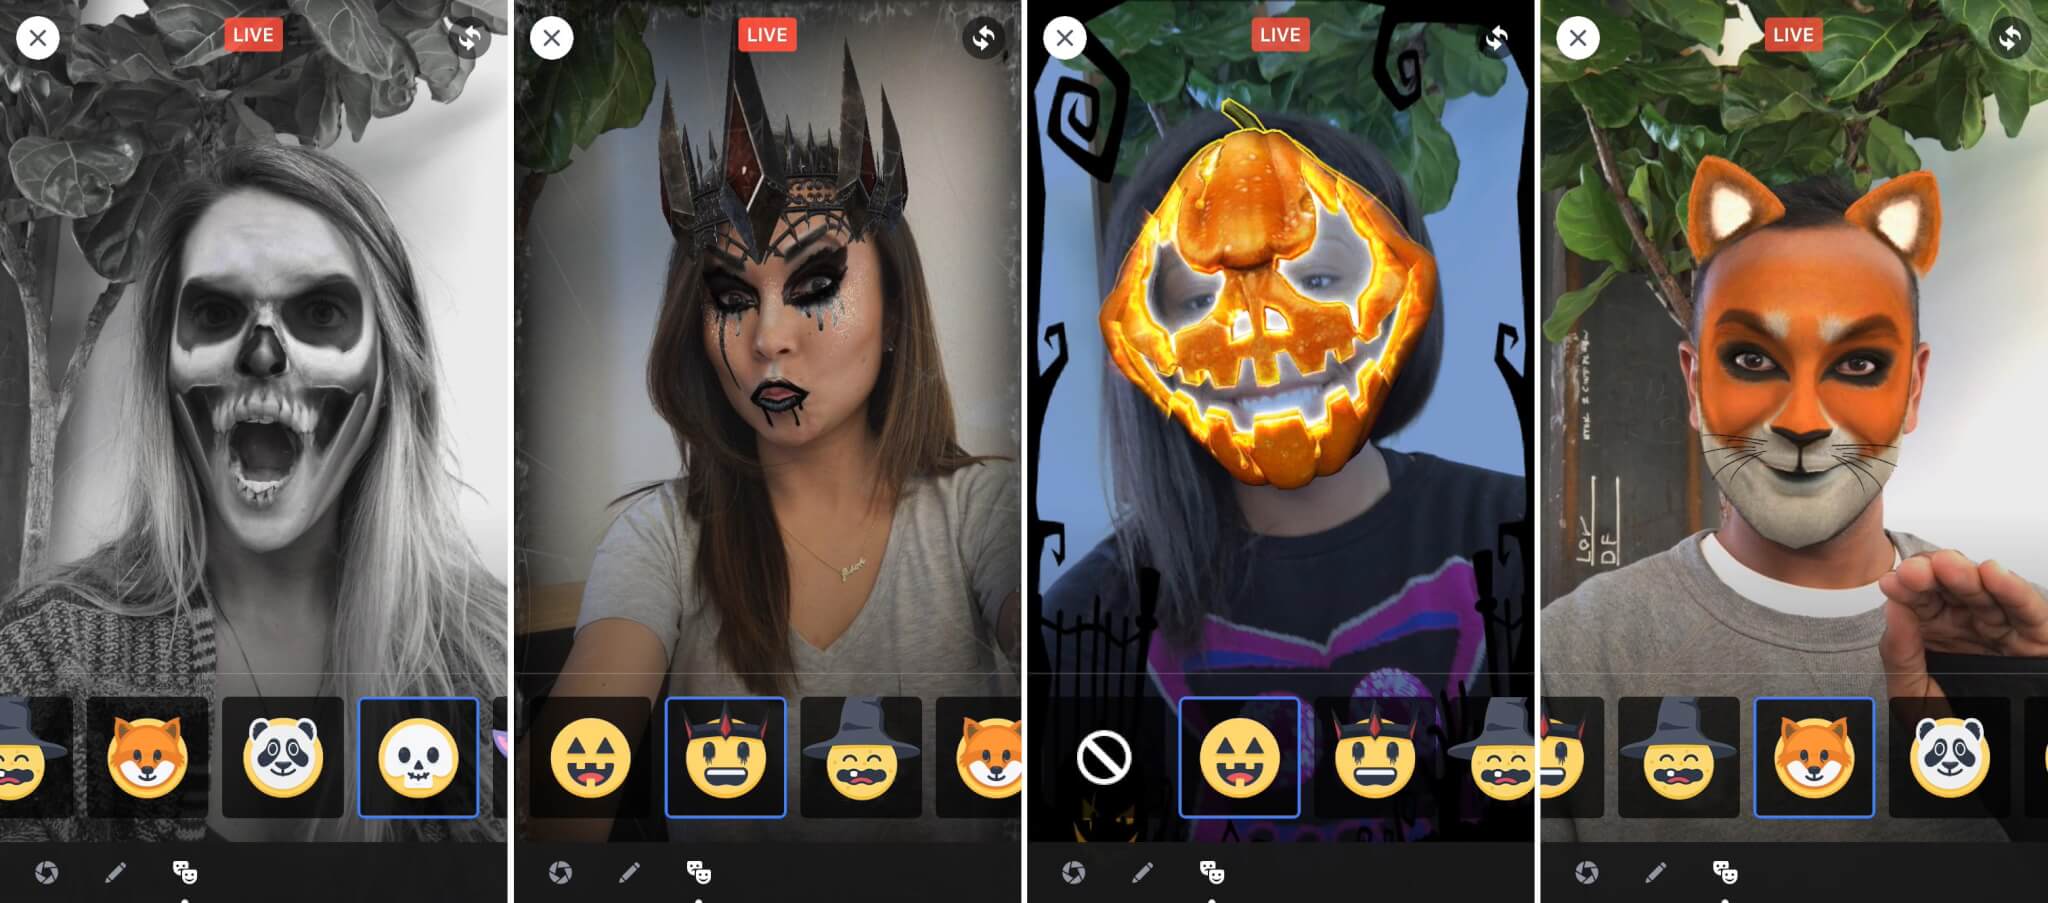 Examples of Snapchat-like lenses for Halloween that can be affixed to Facebook Live broadcasts.